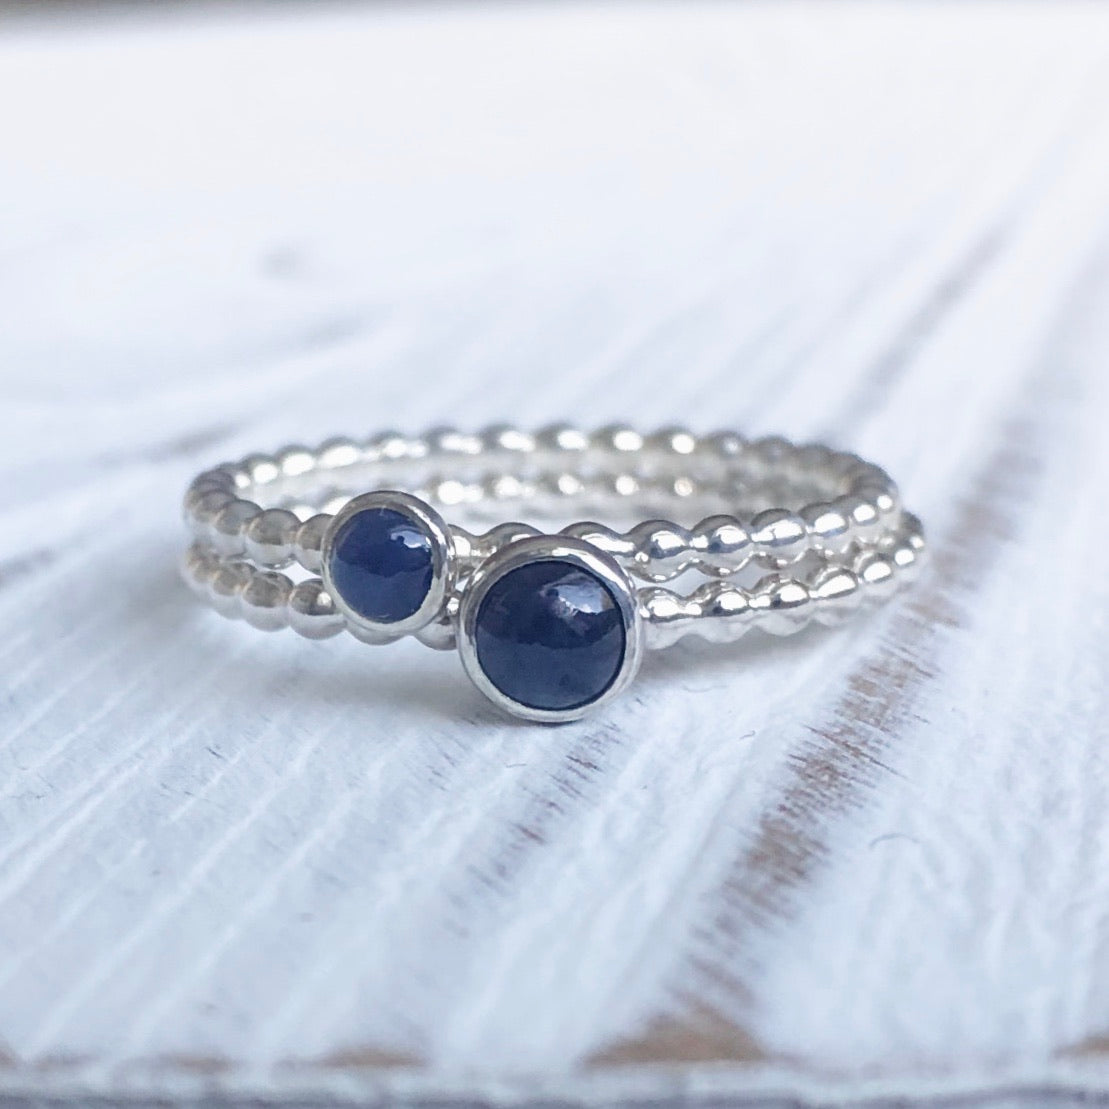 Different size Sapphire Silver Stacking Rings stacked - Trisha Flanagan